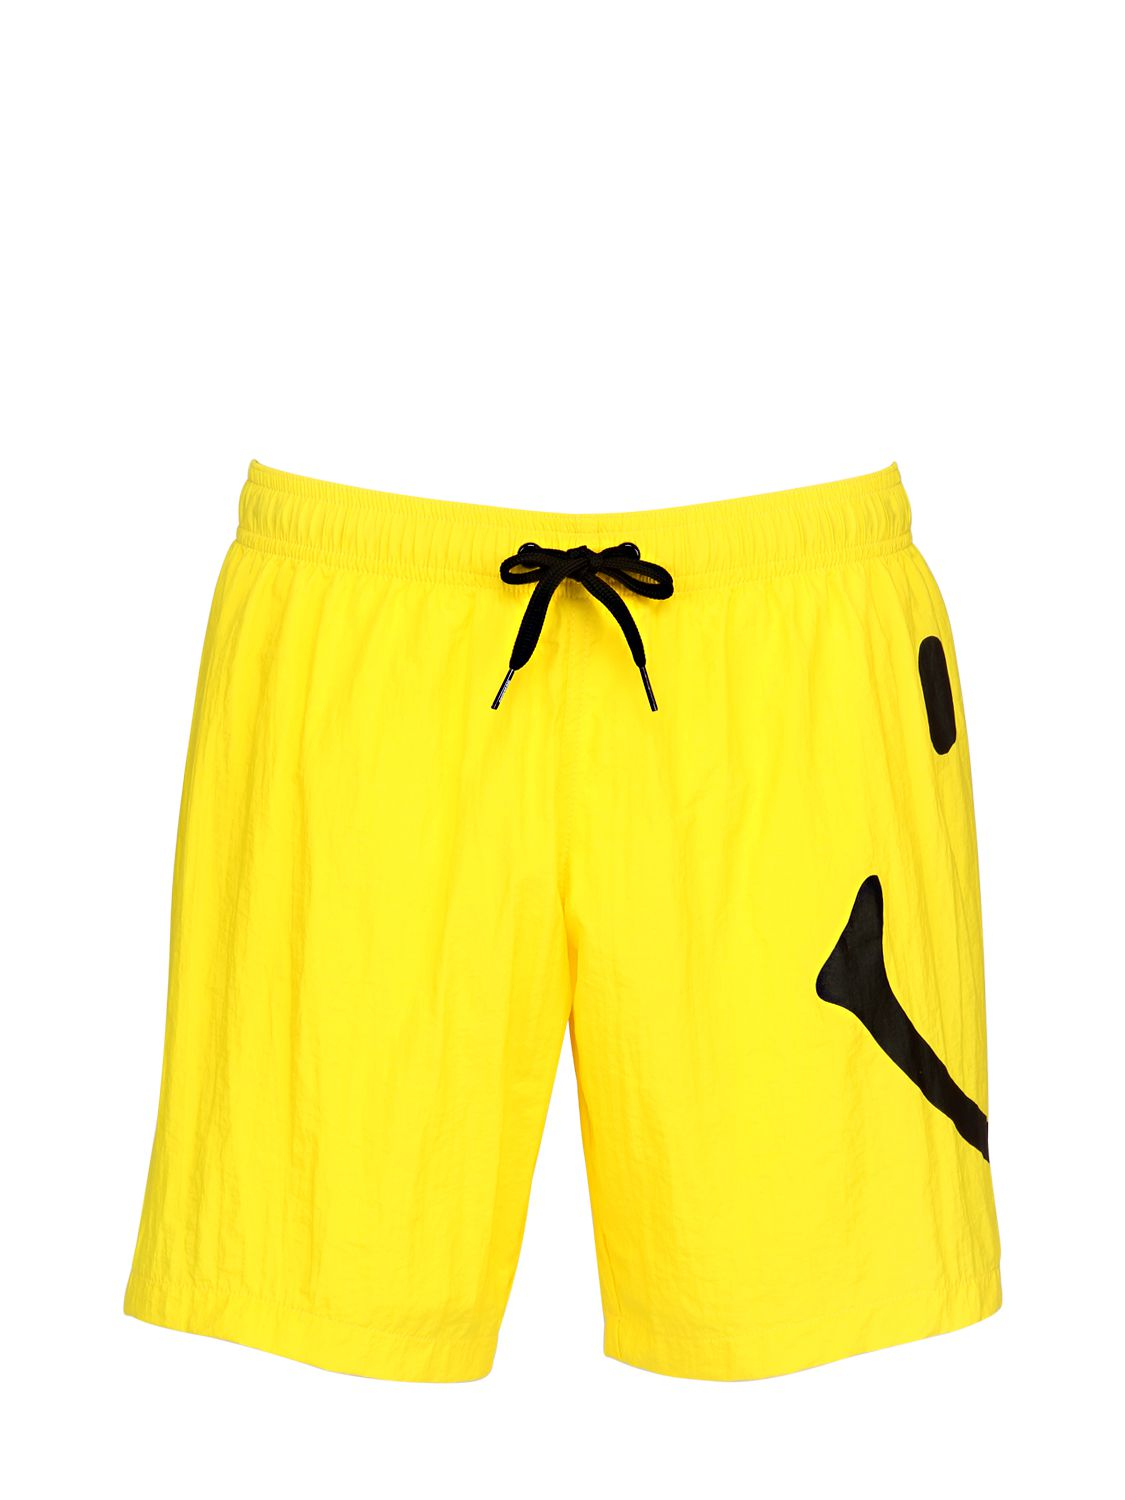 Lyst - Moschino Smiley Printed Nylon Swimming Shorts in Yellow for Men